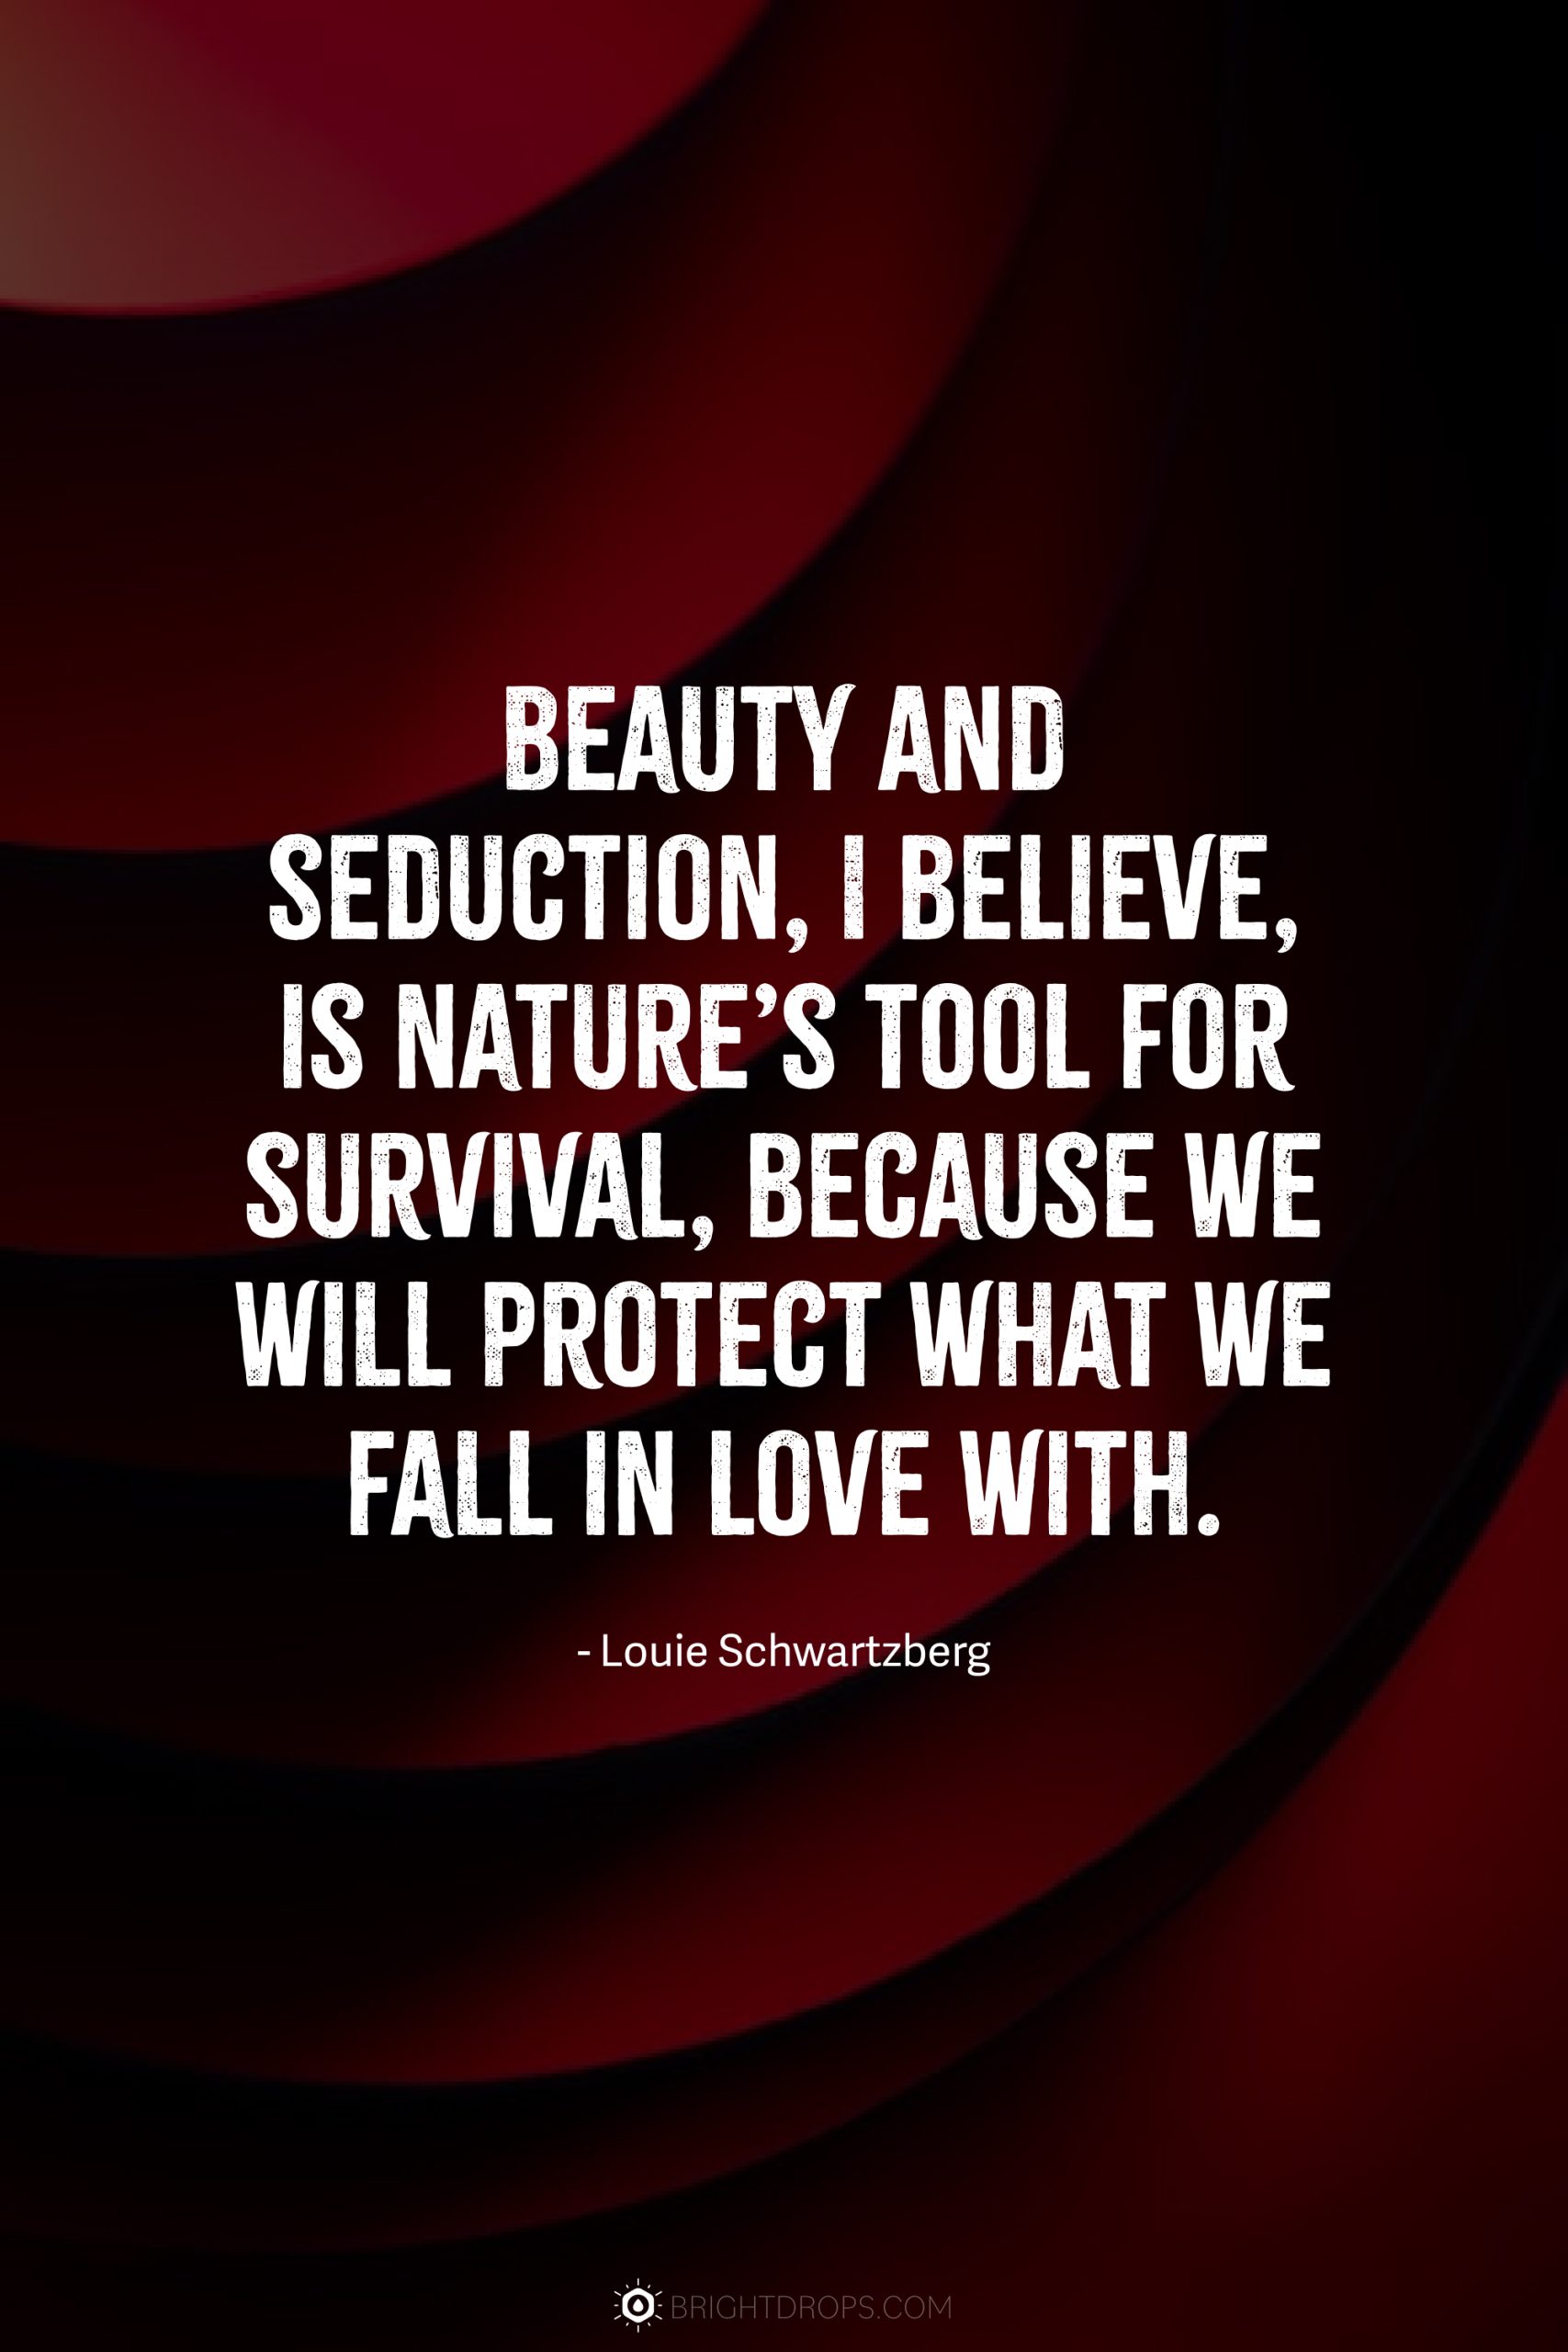 Beauty and seduction, I believe, is nature’s tool for survival, because we will protect what we fall in love with.